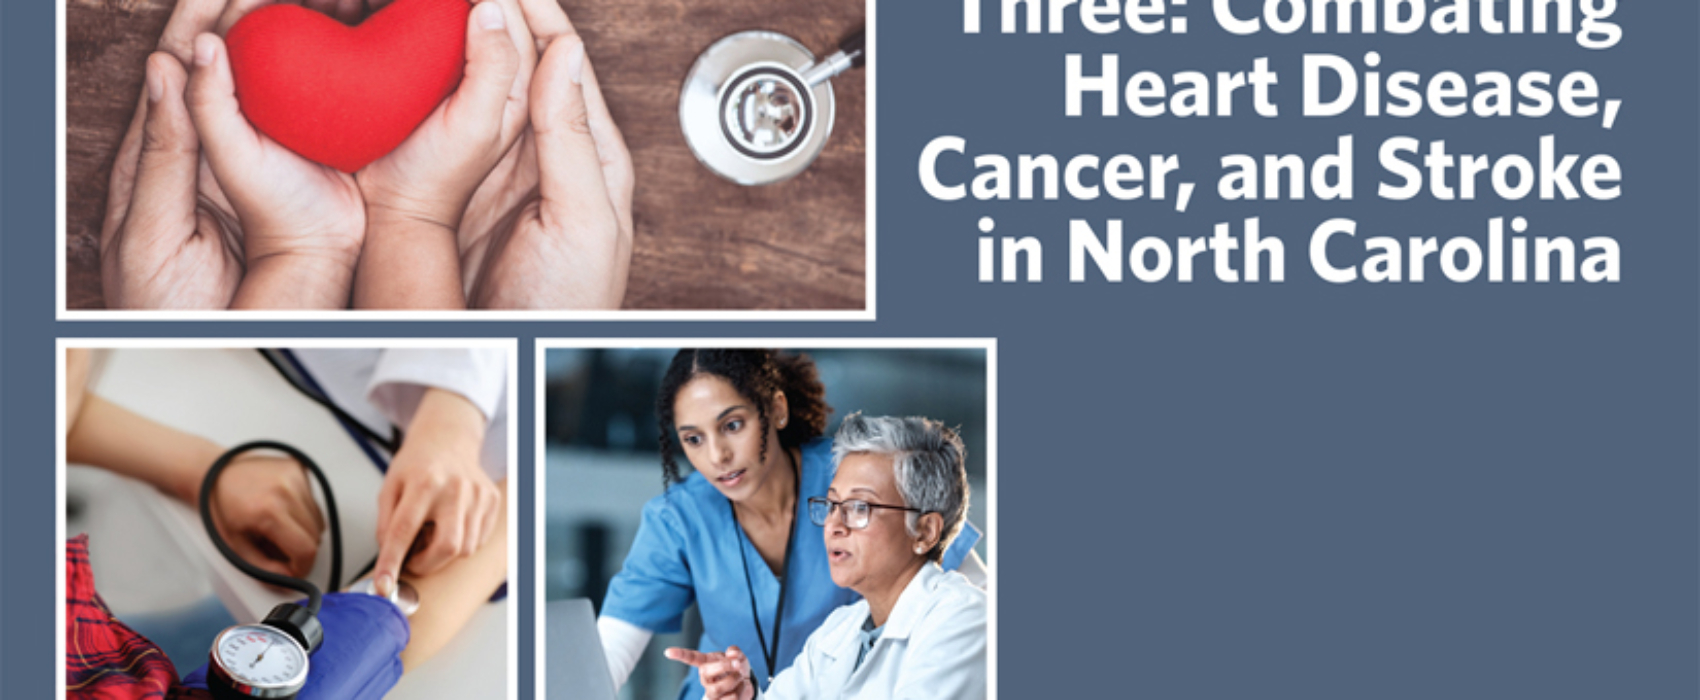 Assessing Cancer and Cardiovascular Disease as Causes of Death in North Carolina